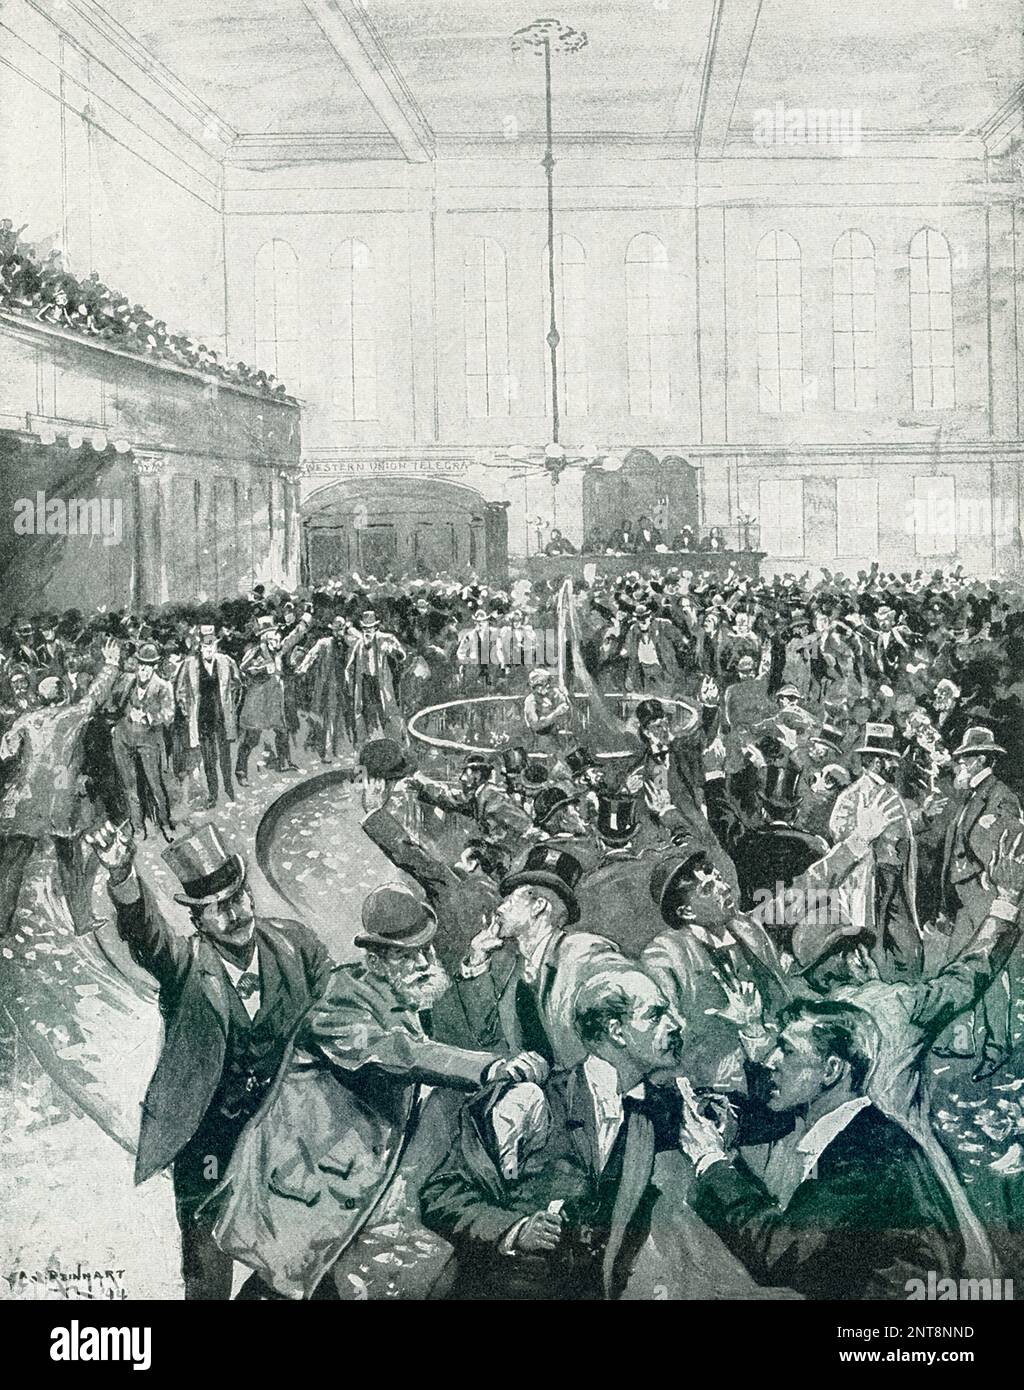 The 1896 caption reads: “Scene in New York Gold Room on Black Friday September 24, 1869, drawn by C S Reinhart from photographs and descriptions by eye-witnesses.”  Black Friday, in U.S. history, a securities market panic that occurred on September 24, 1869, as a result of plummeting gold prices. The crash was a consequence of an attempt by financier Jay Gould and railway magnate James Fisk to corner the gold market and drive up the price. Stock Photo